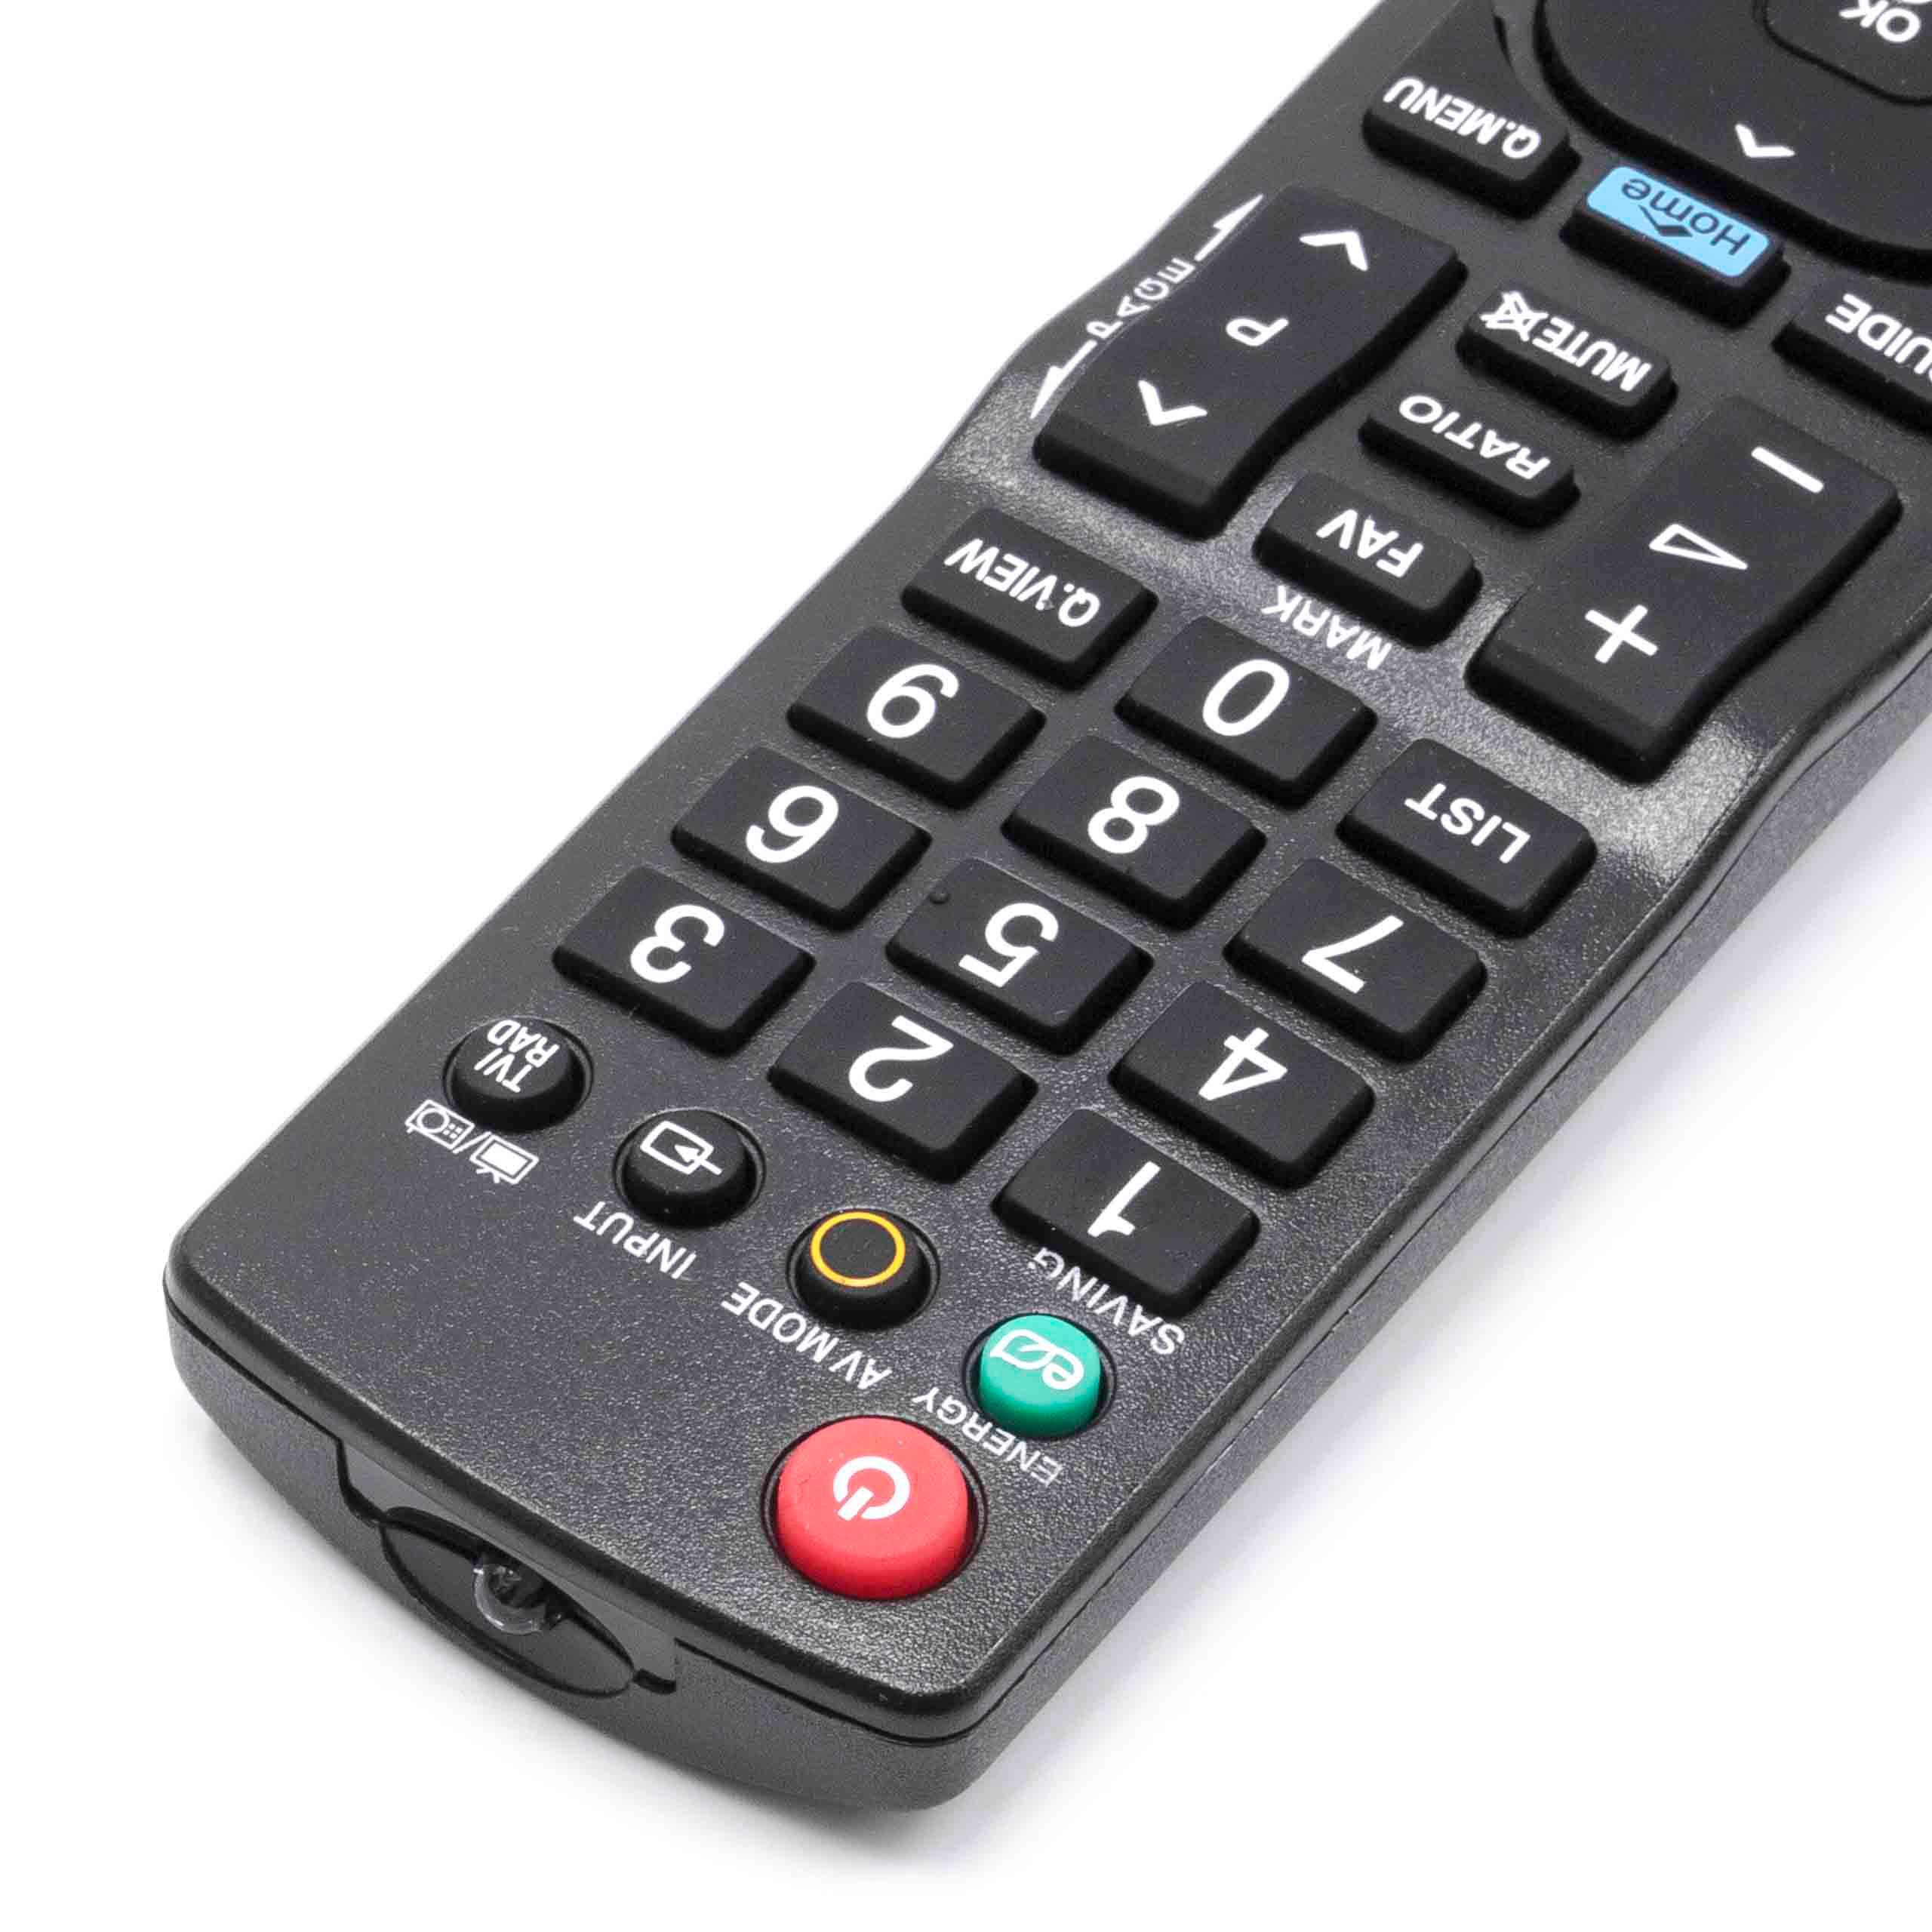 Remote Control replaces LG AKB72915299, AKB72915244 for LG TV